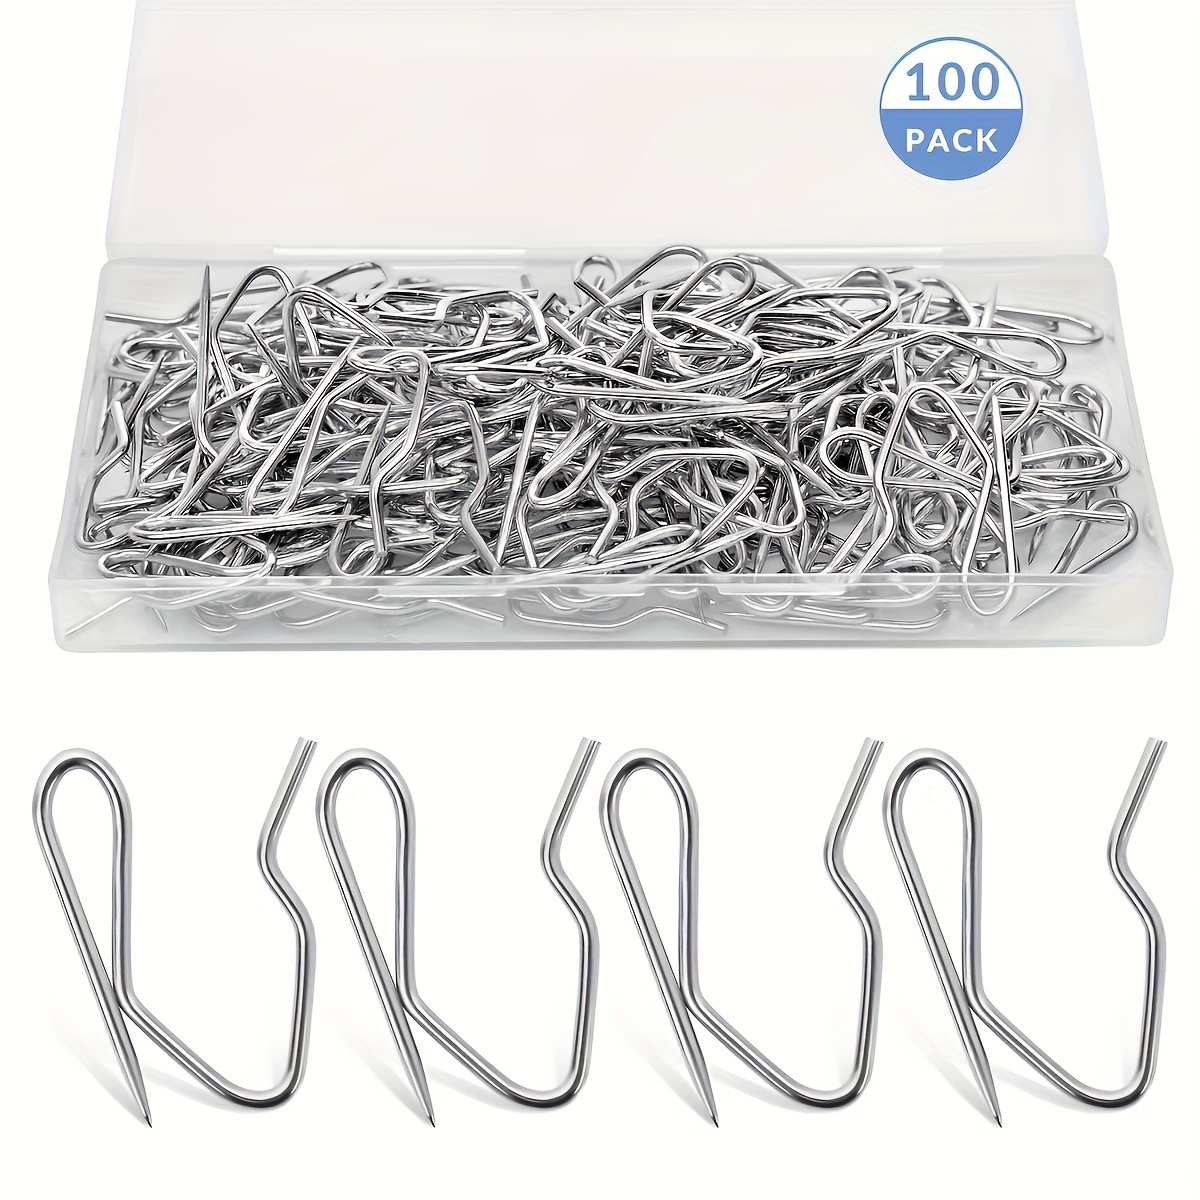 Coideal Curtain Hooks with Clips Silver, 100 Pack Stainless Steel